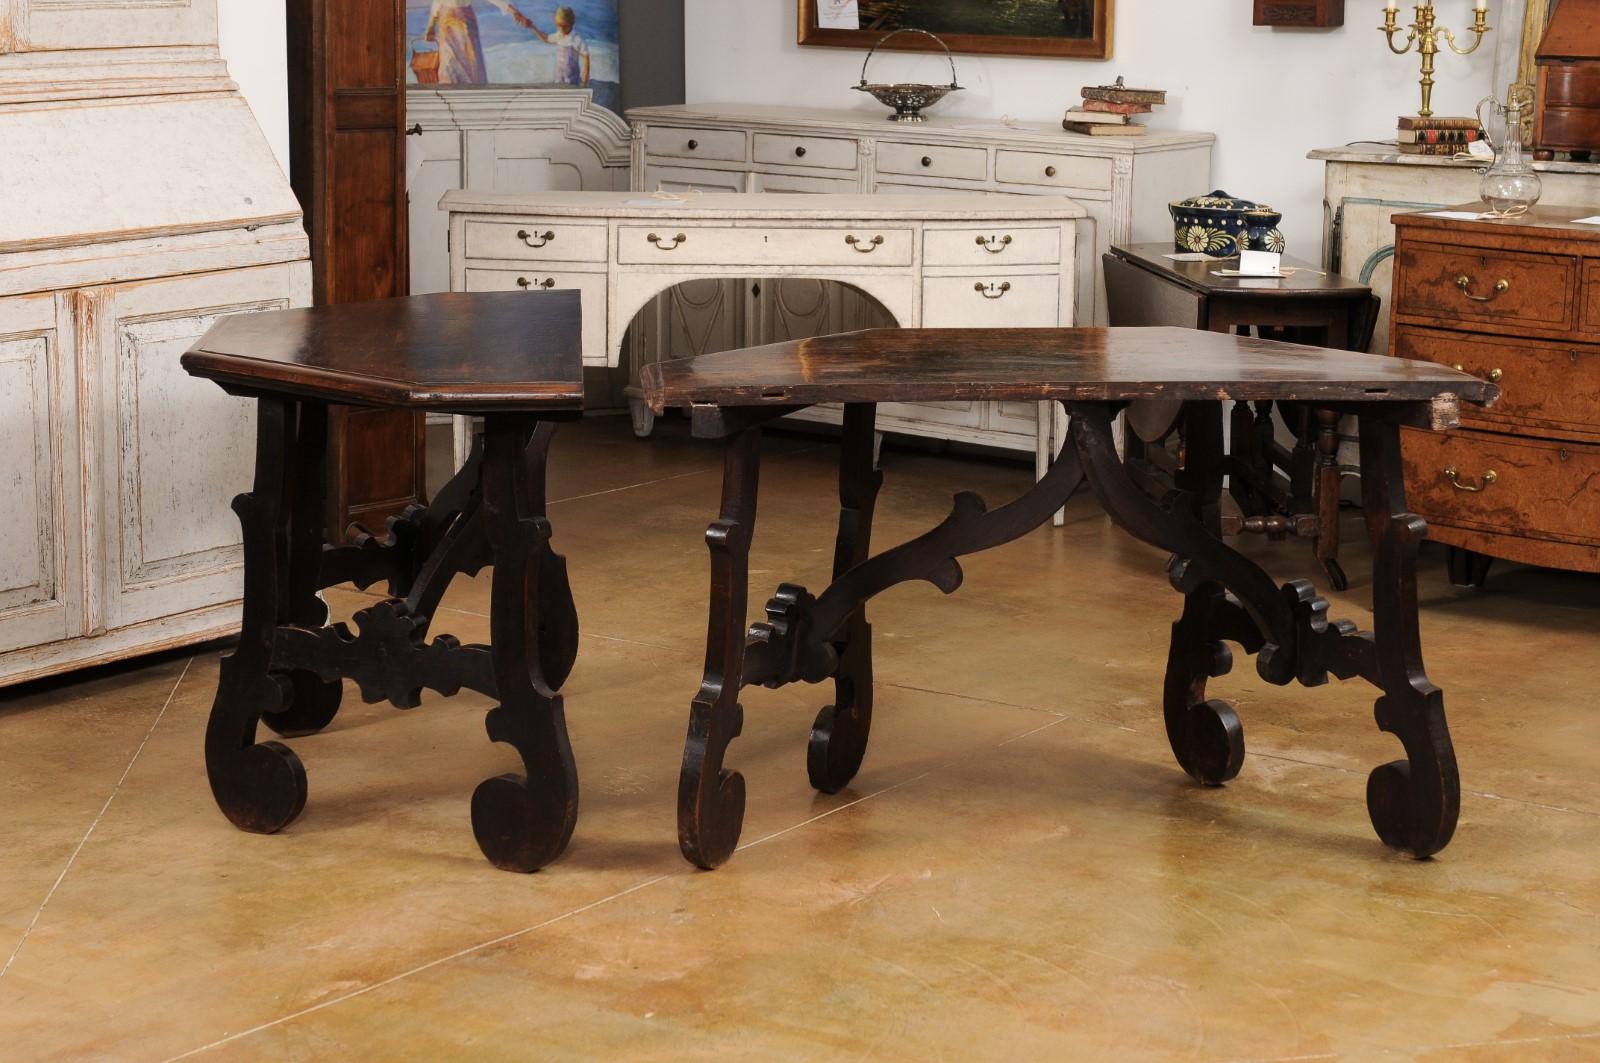 17th Century Italian Baroque Walnut Fratino Consoles with Carved Bases, a Pair For Sale 6